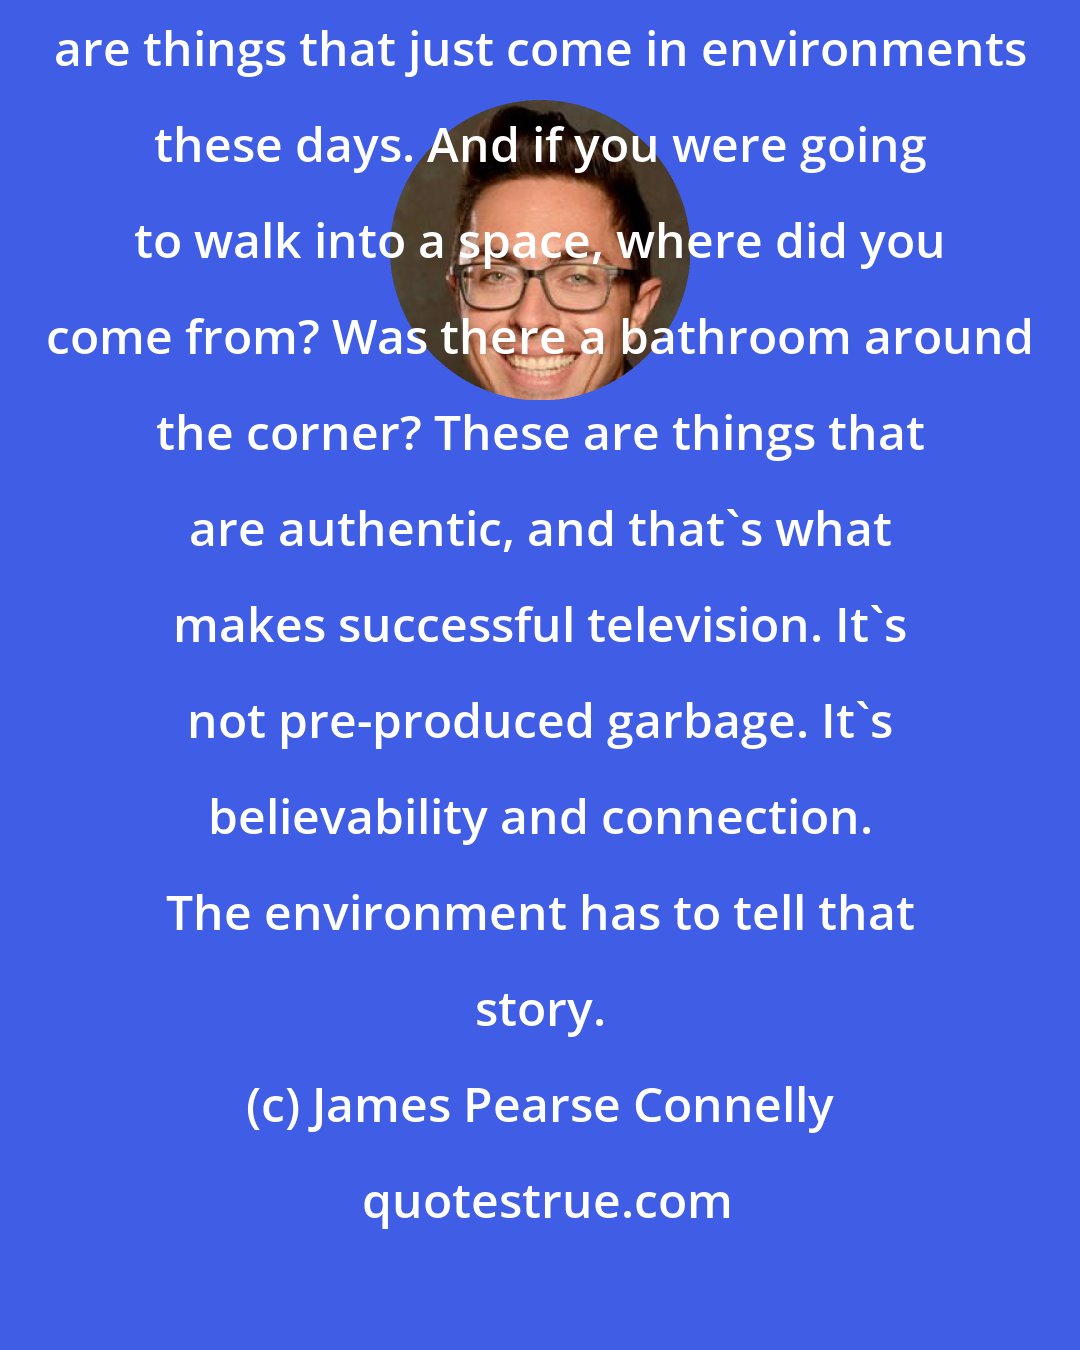 James Pearse Connelly: I don't even know of a room that doesn't have a flat-screen TV in it. These are things that just come in environments these days. And if you were going to walk into a space, where did you come from? Was there a bathroom around the corner? These are things that are authentic, and that's what makes successful television. It's not pre-produced garbage. It's believability and connection. The environment has to tell that story.